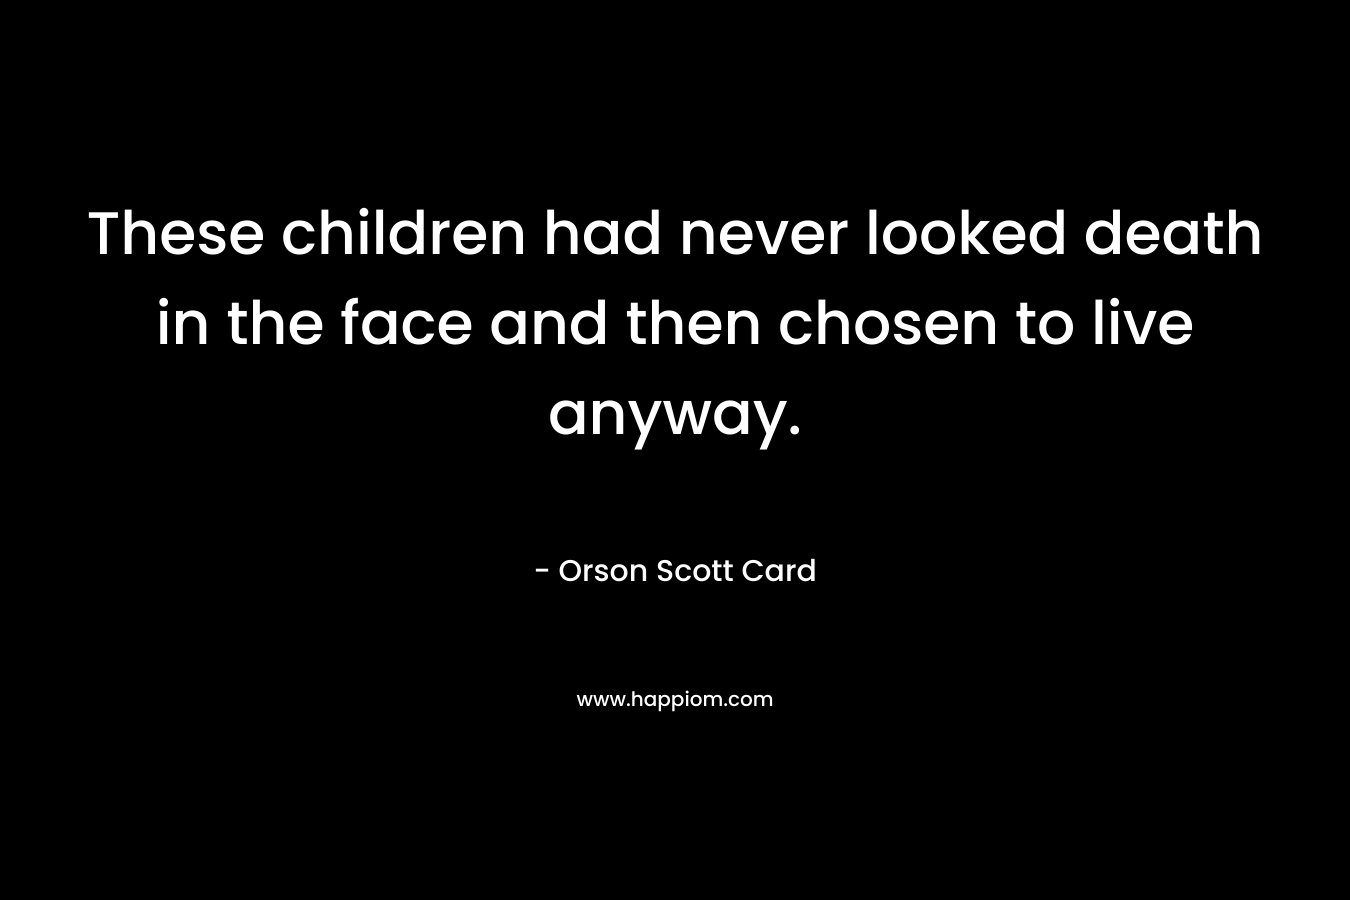 These children had never looked death in the face and then chosen to live anyway. – Orson Scott Card